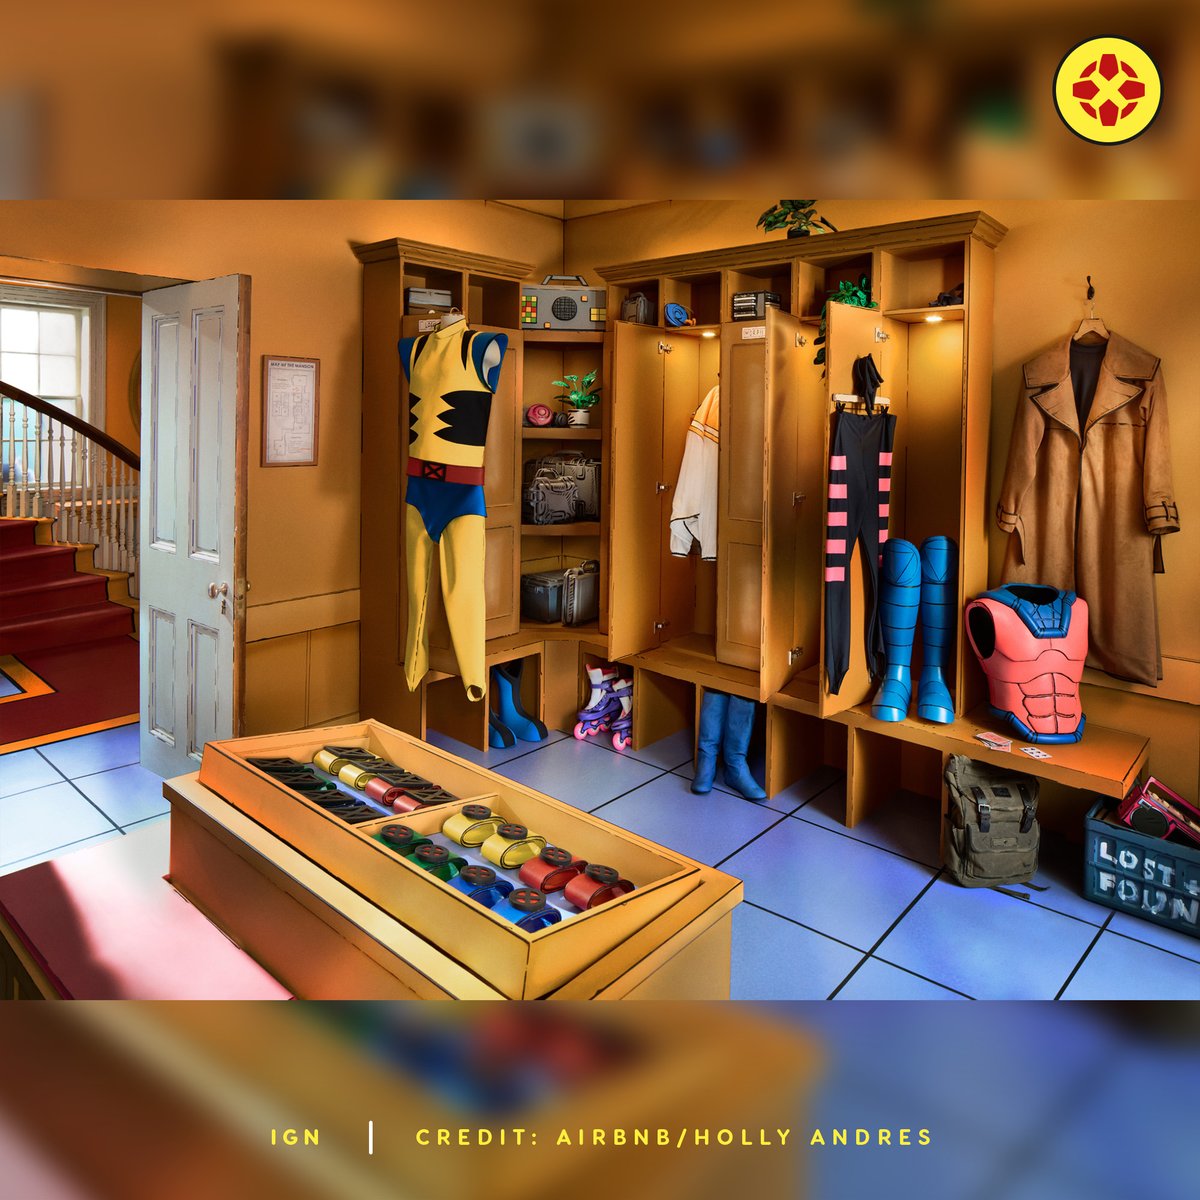 Airbnb has announced the X-Mansion in partnership with Marvel, so now you can live your X-Men '97 dreams by training in the Danger Room, reaching out telepathically with Cerebro, and more! (1/3)